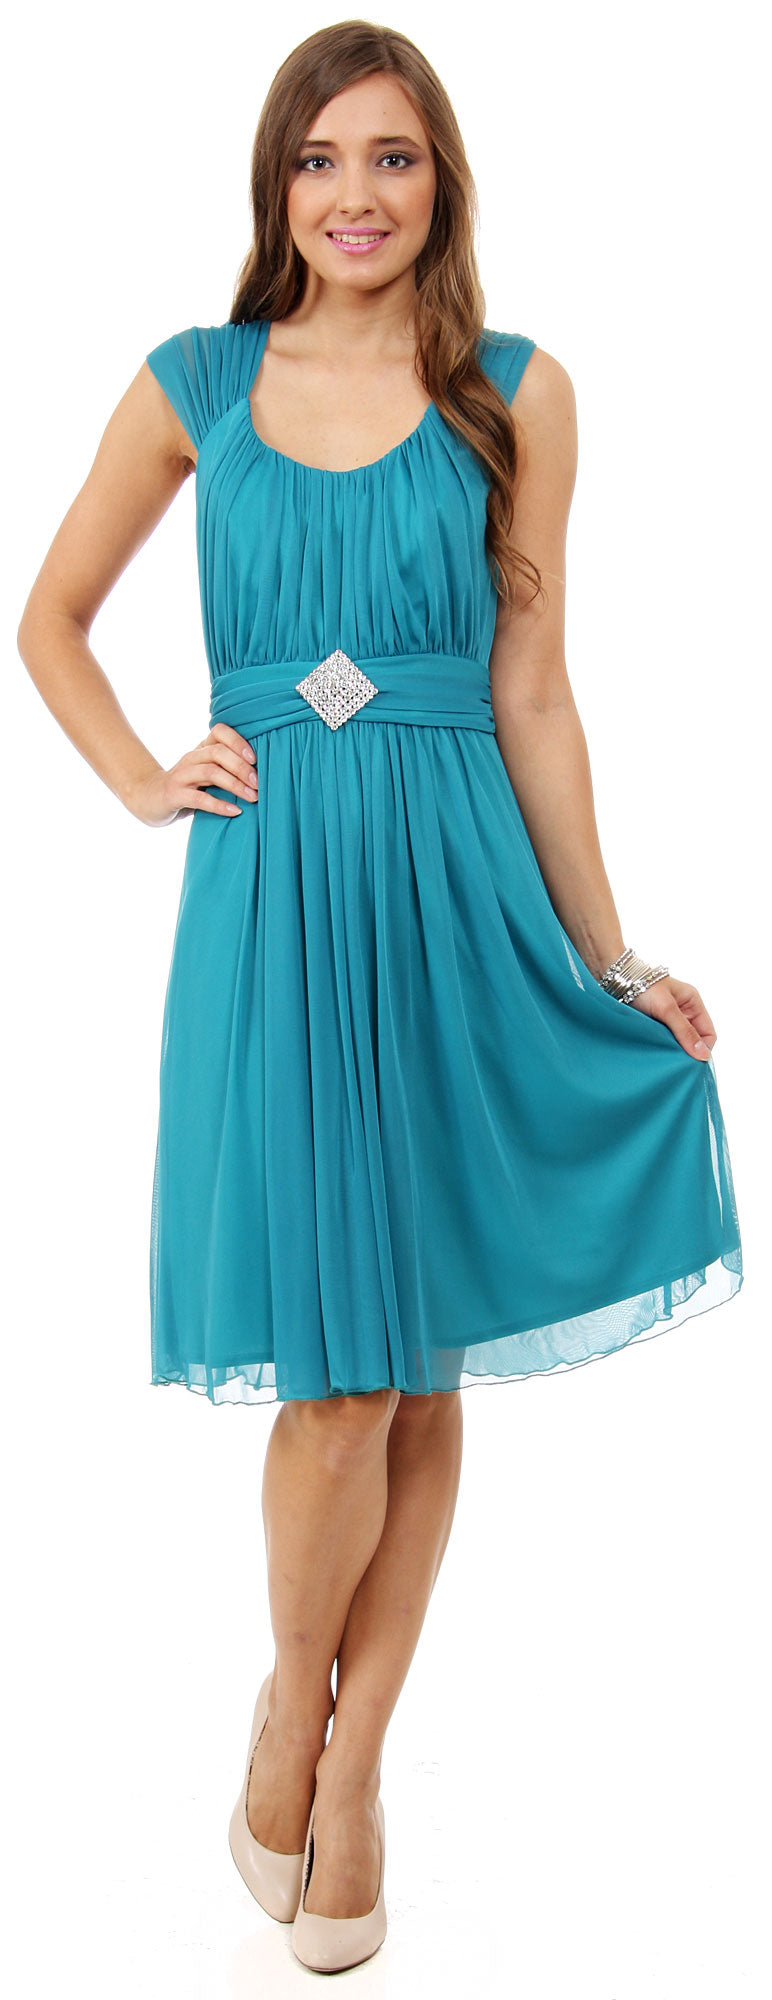 Image of Scoop Neck Broad Shirred Short Bridesmaid Party Dress in Jade Green